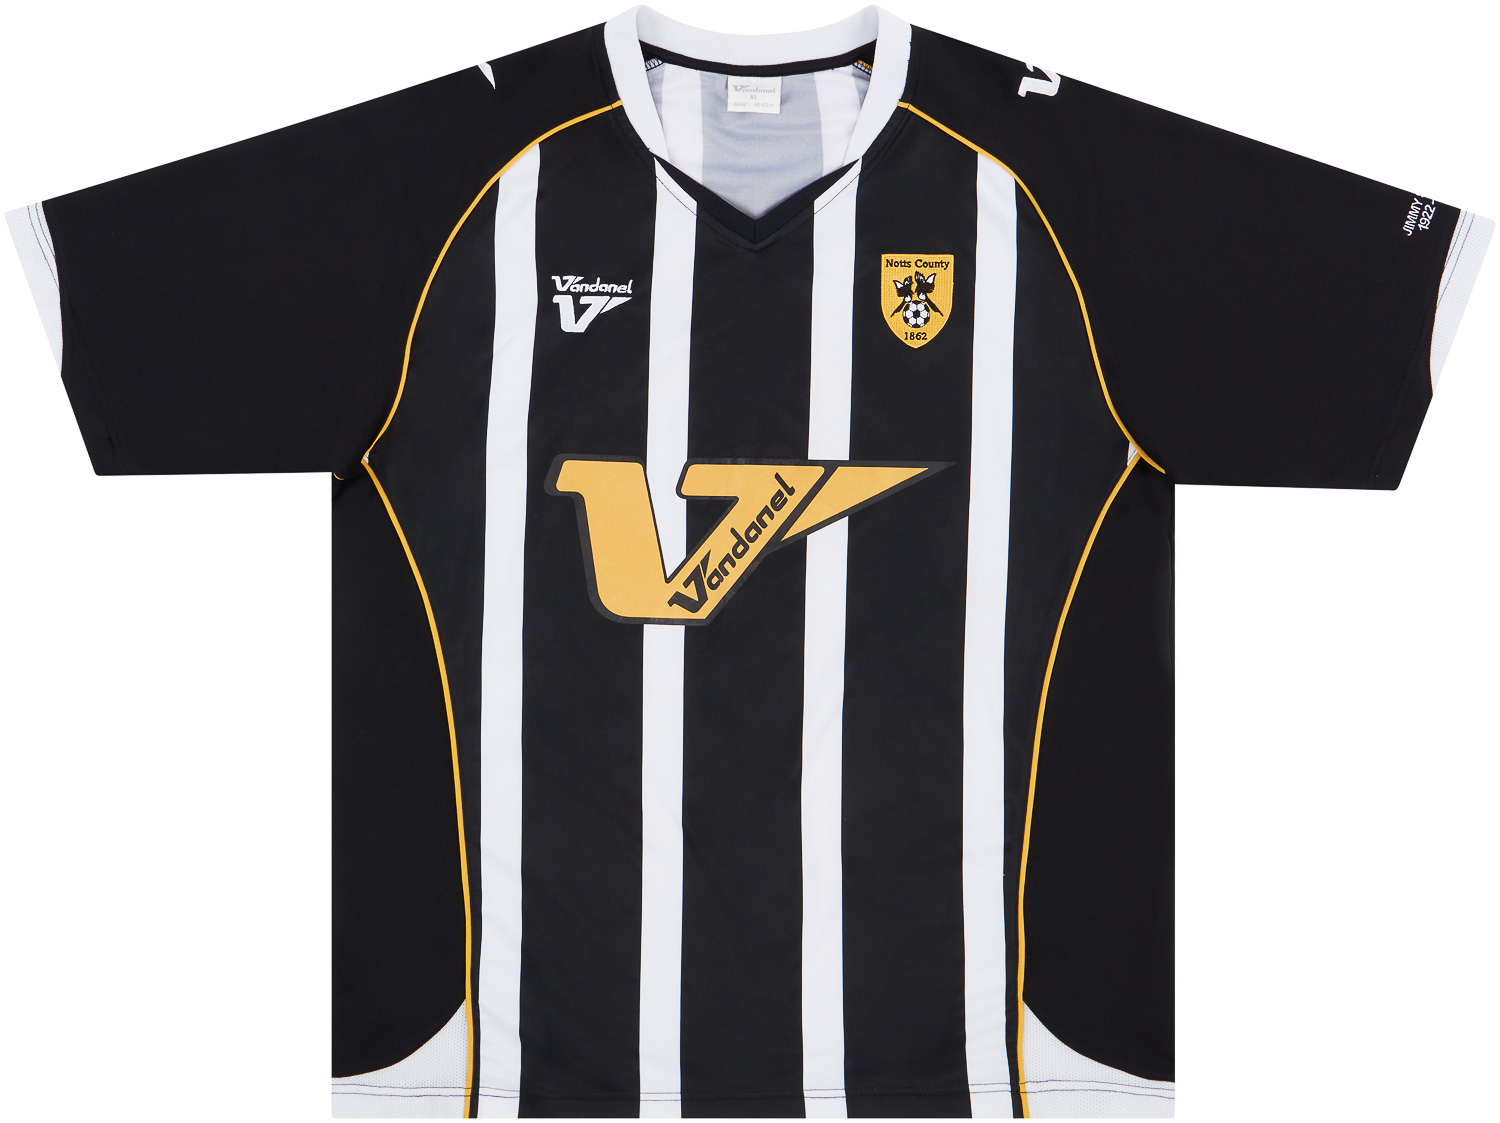 Notts County Away football shirt 2010 - 2011. Sponsored by Vision Express